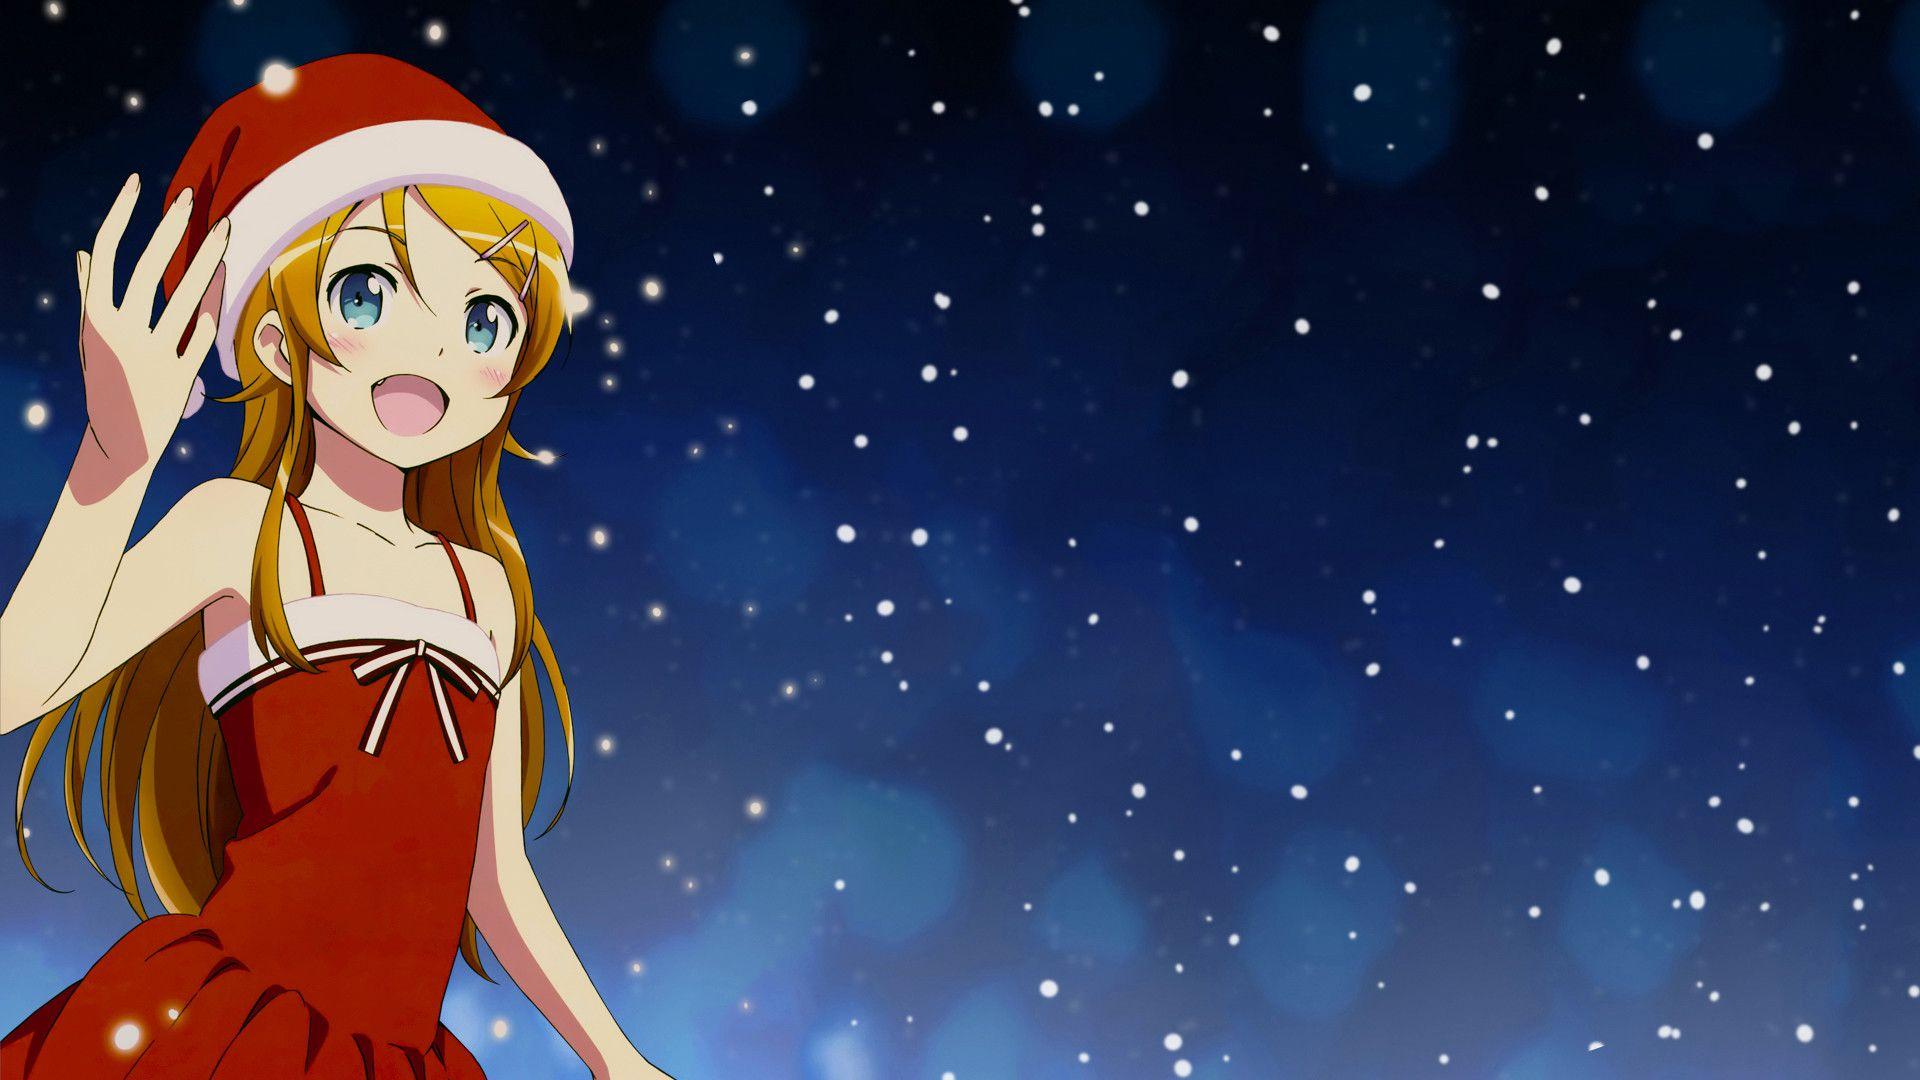 200+] Anime Christmas Pictures | Wallpapers.com